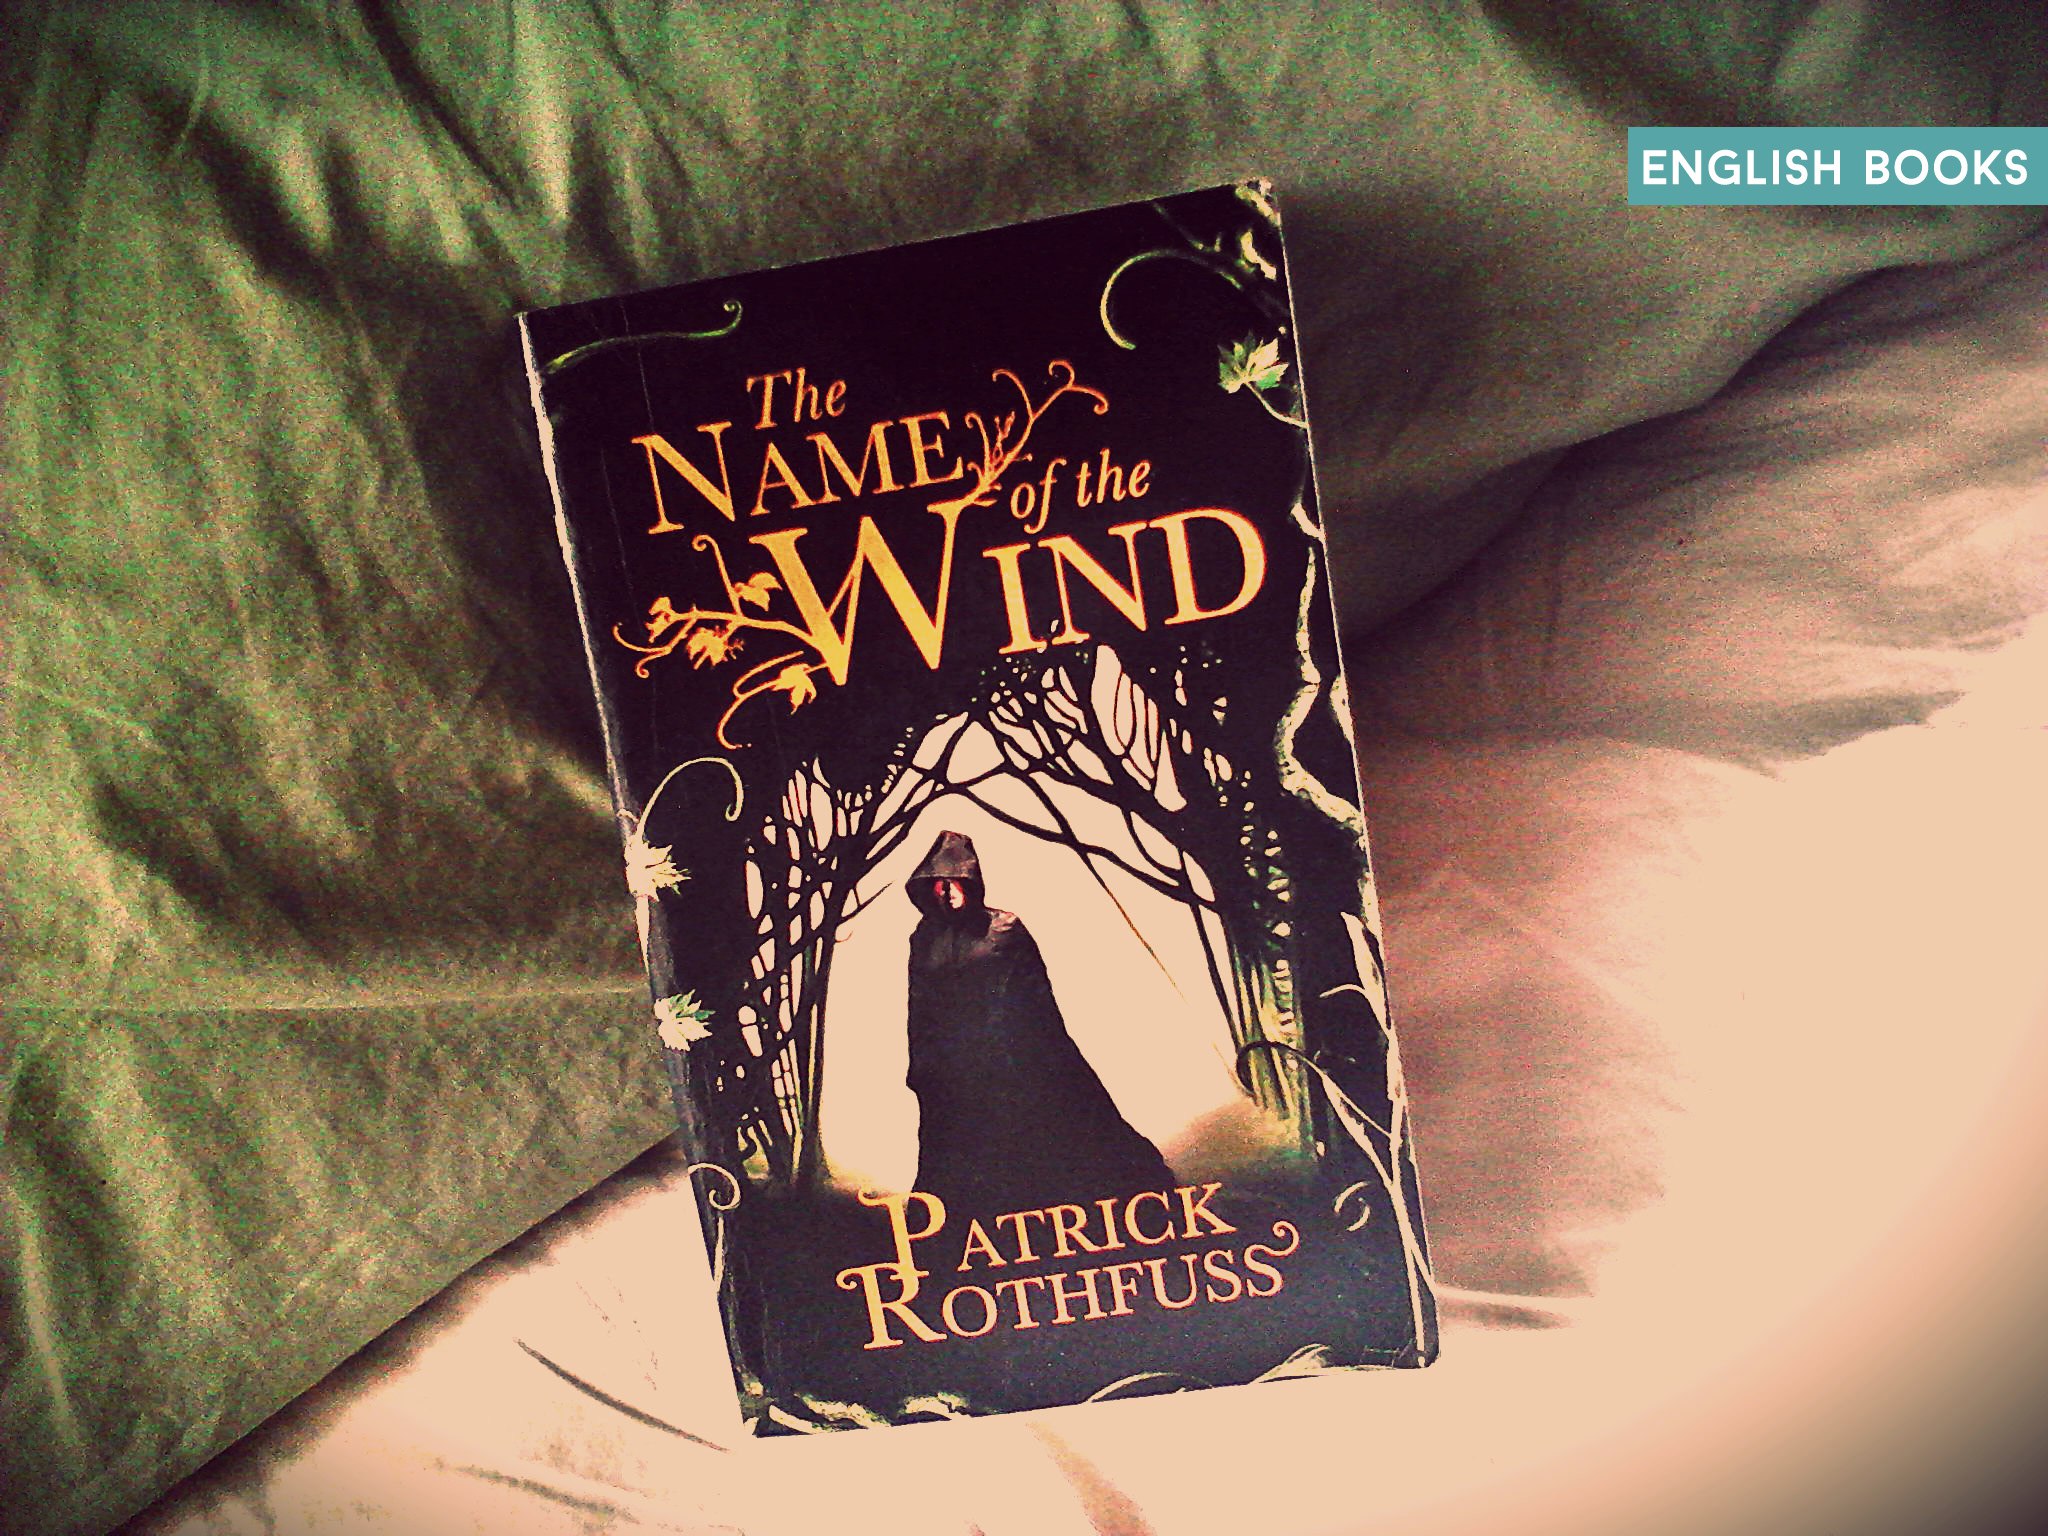 Patrick Rothfuss — The Name Of The Wind